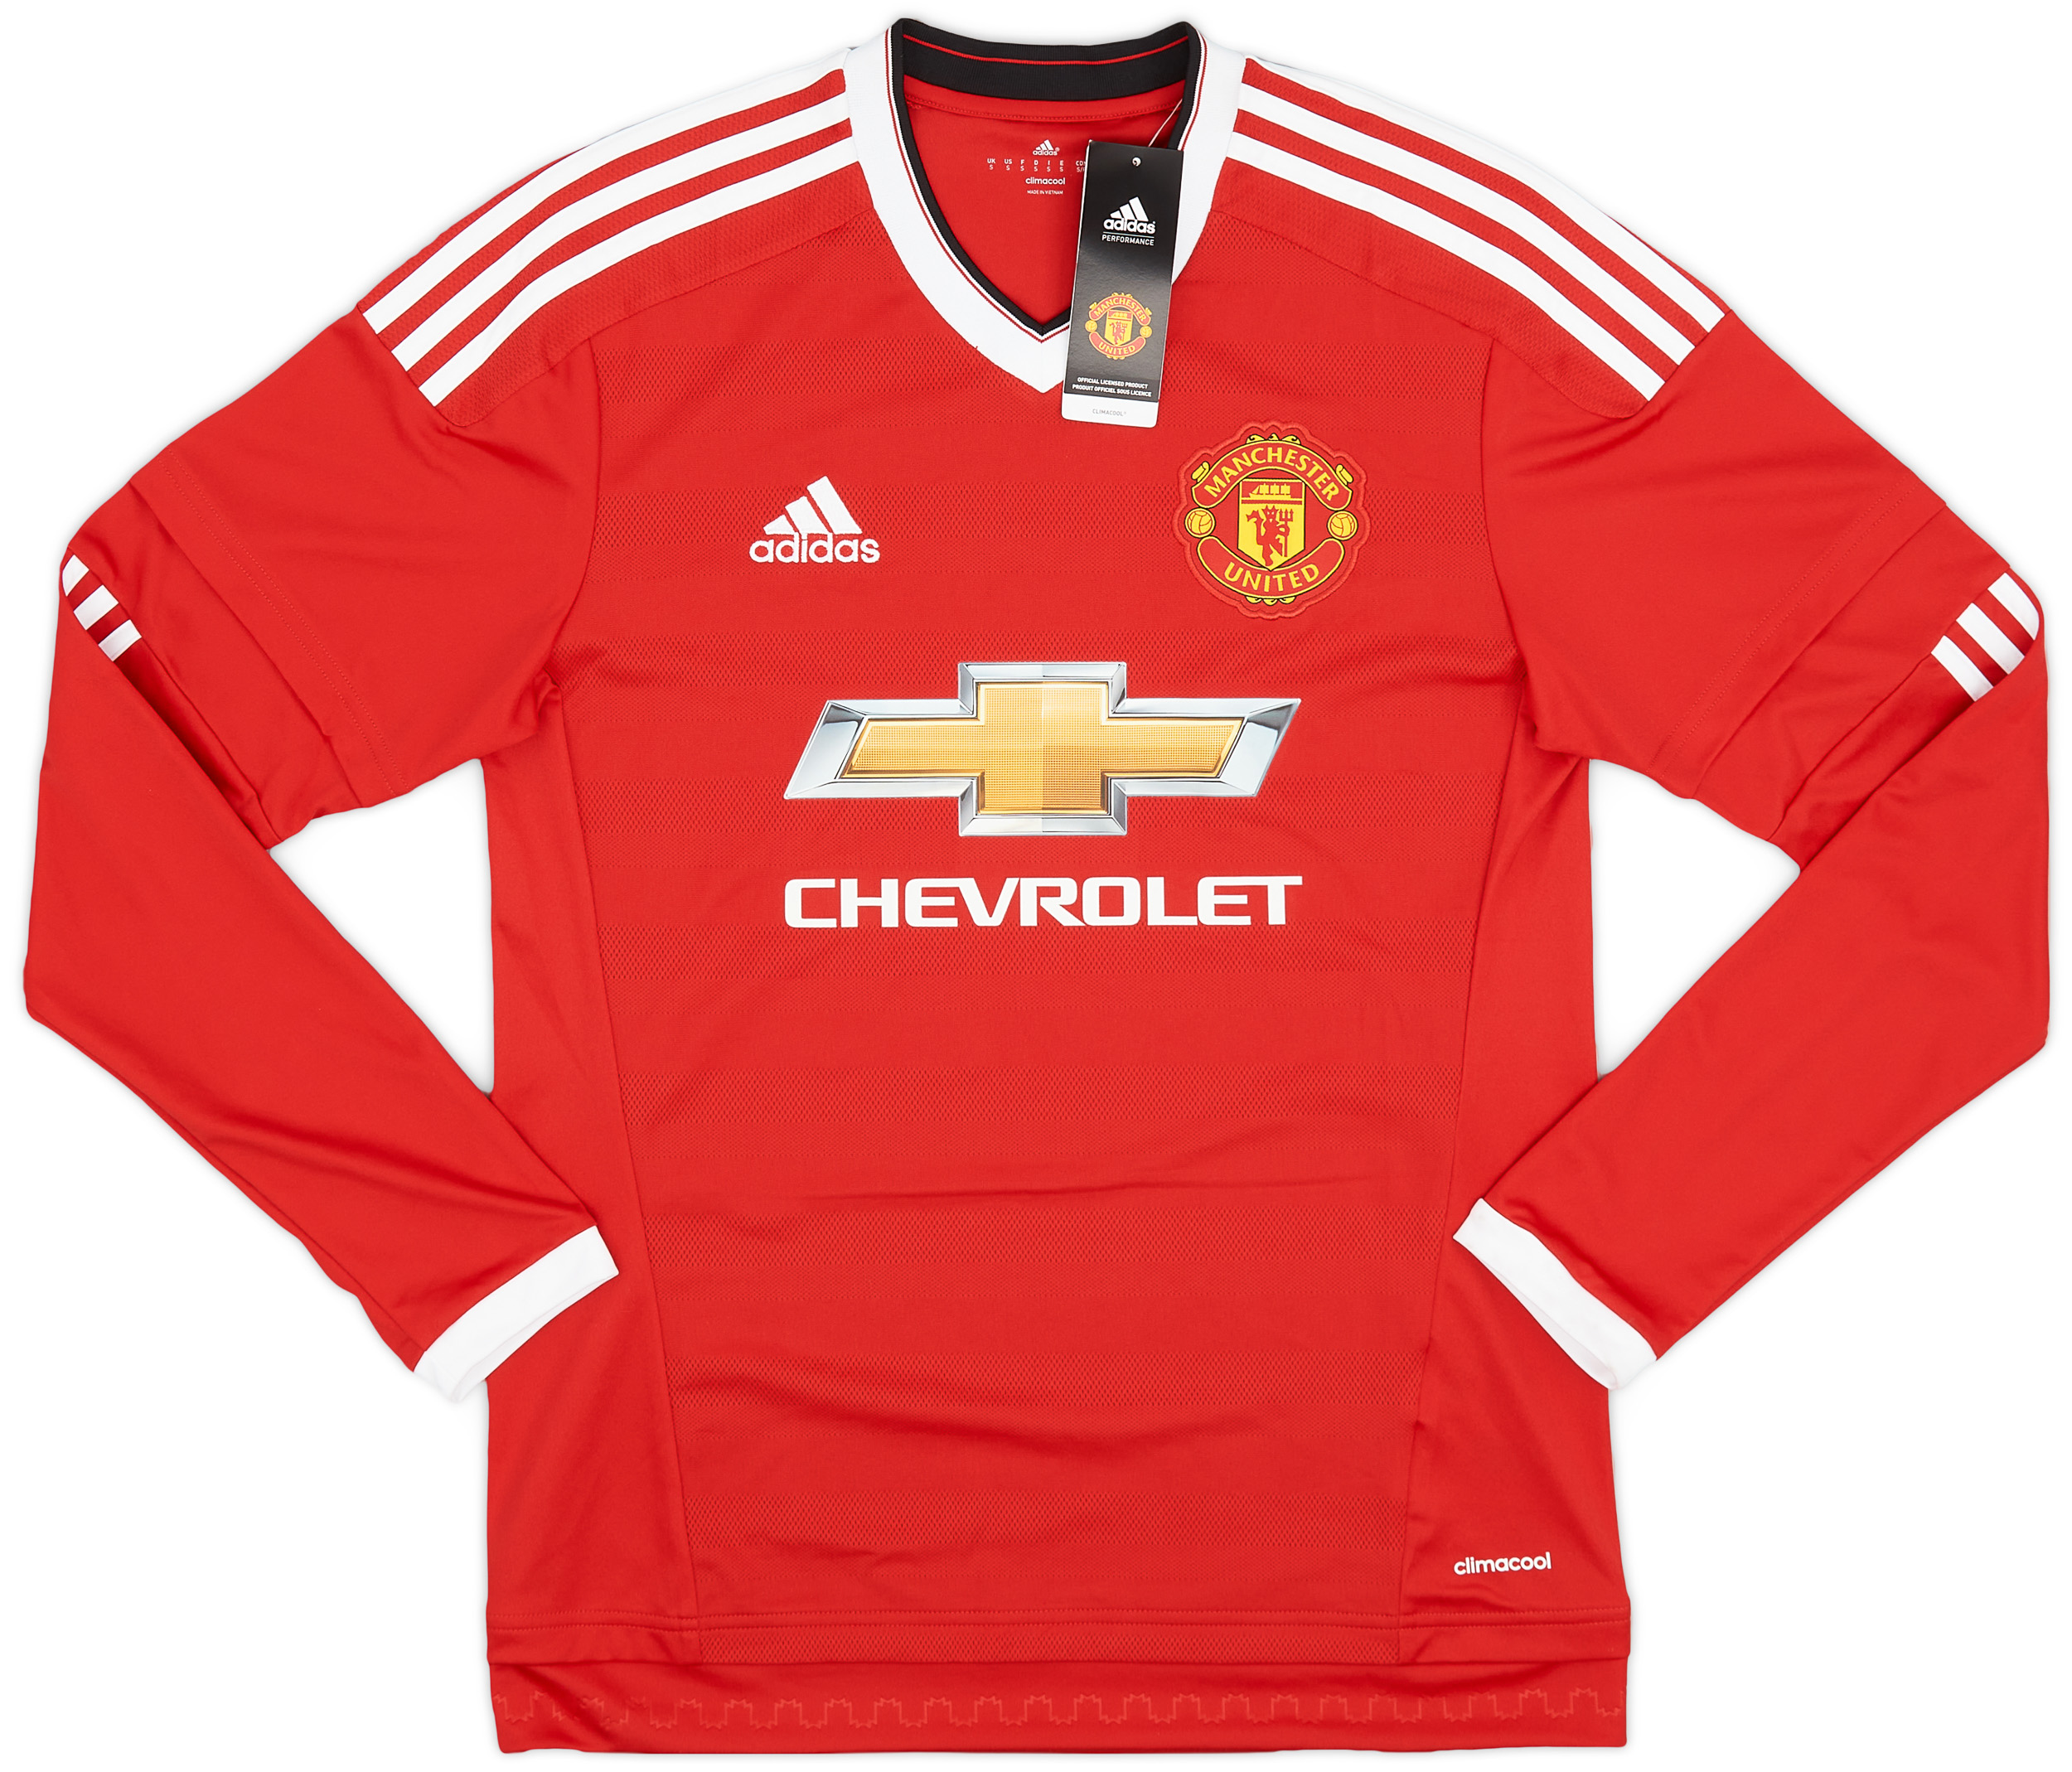 2015-16 Manchester United Home Shirt ()